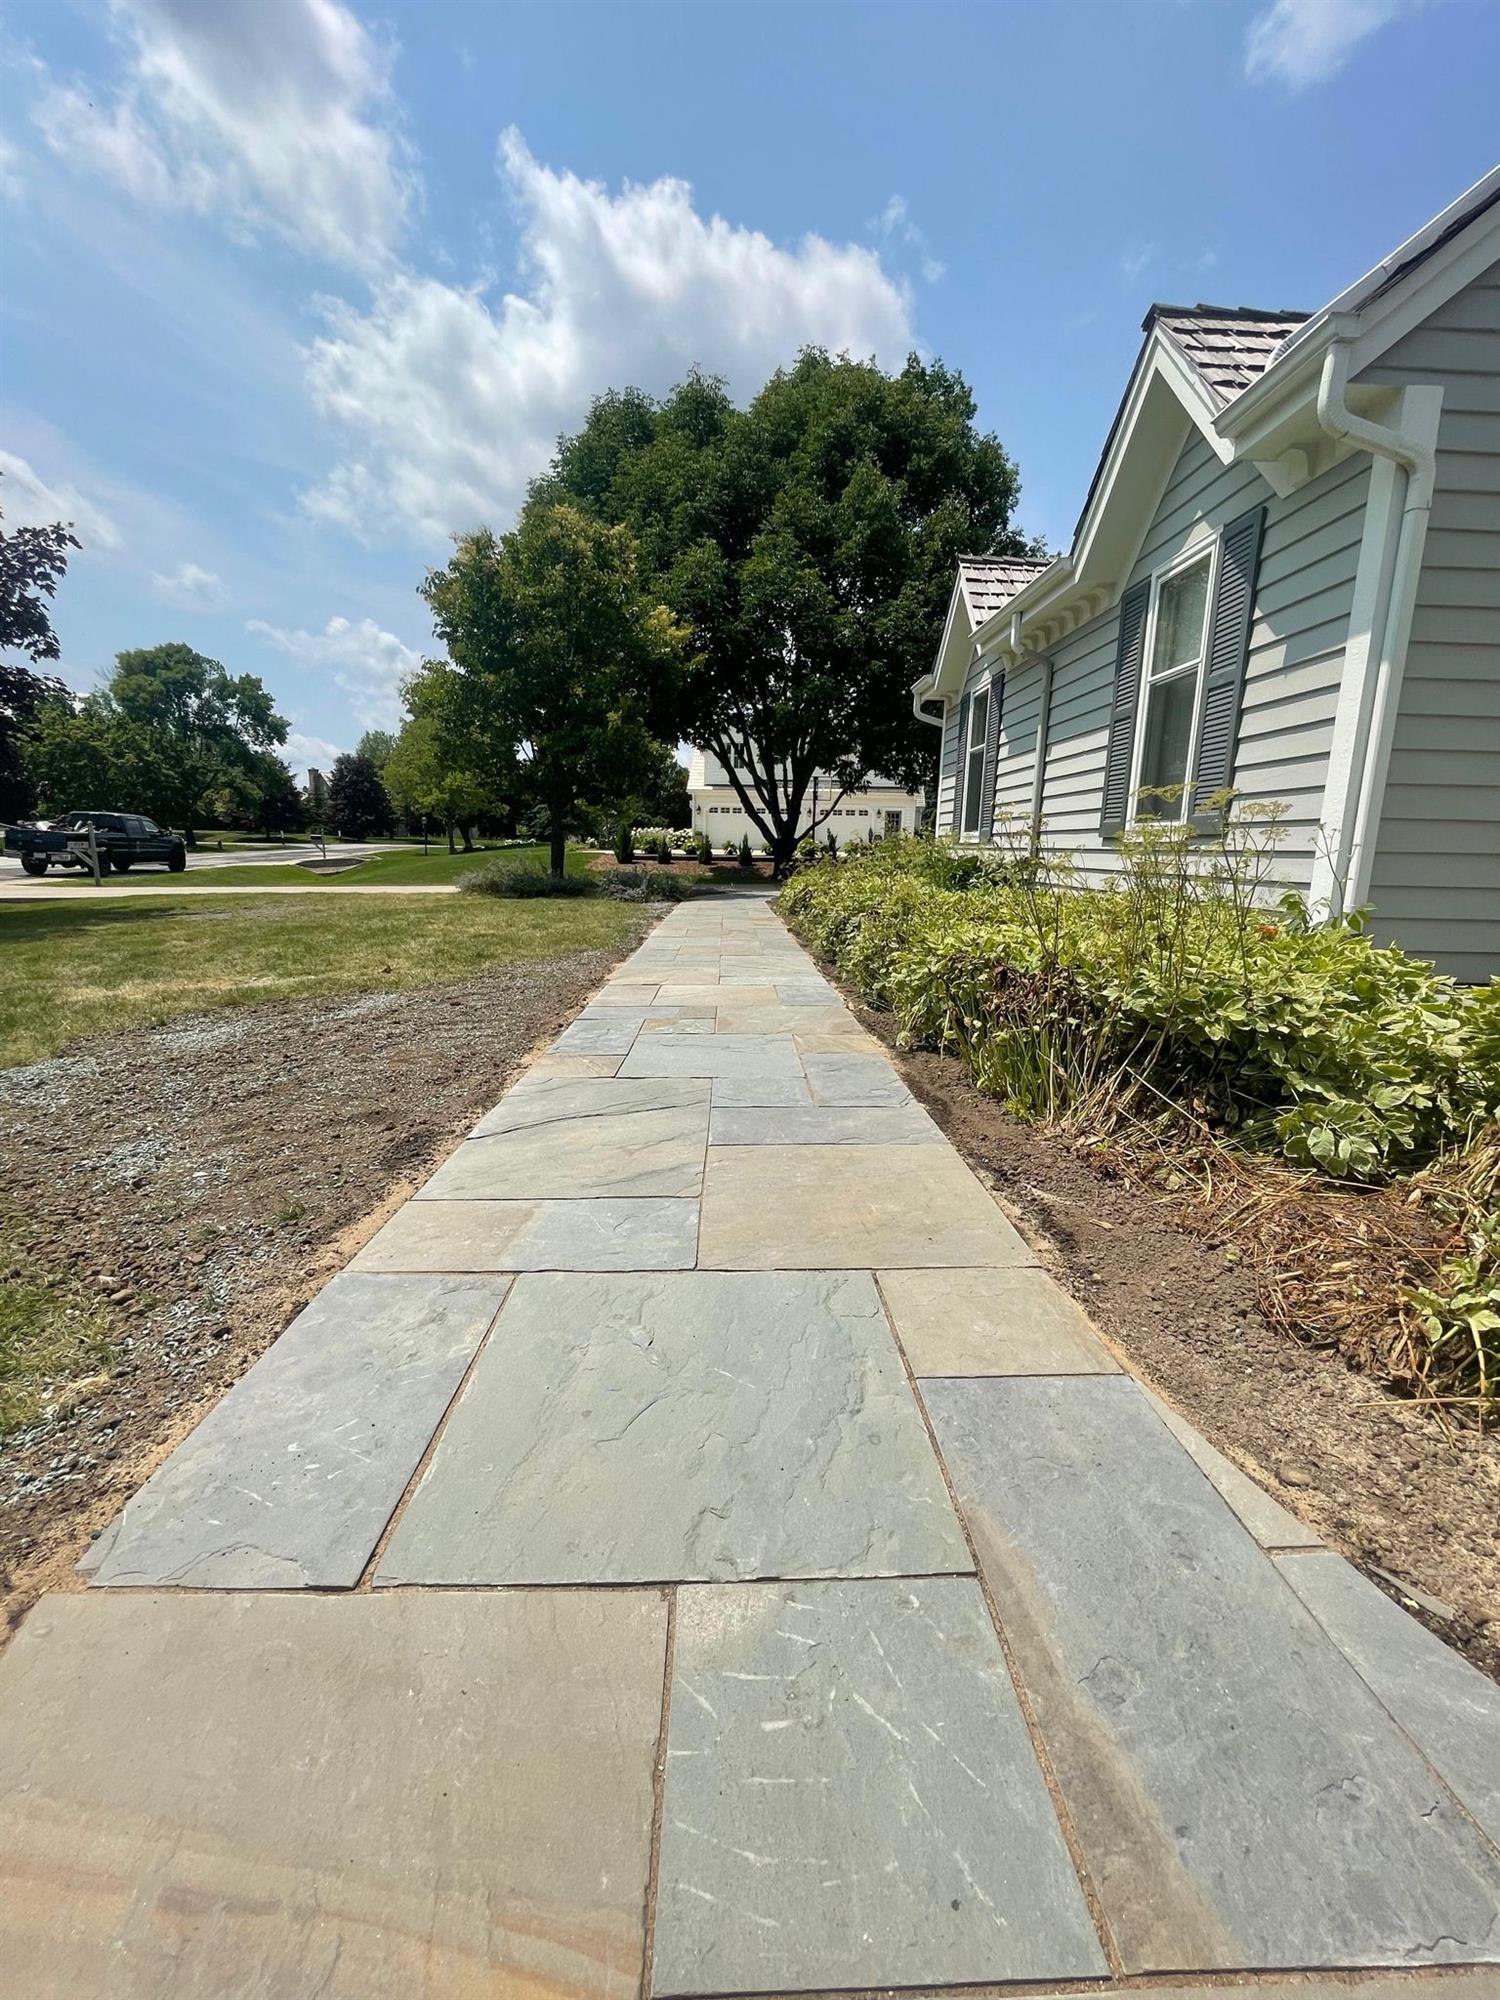 This paved path follows along the side of the house, utilizing natural stone of various colors. 